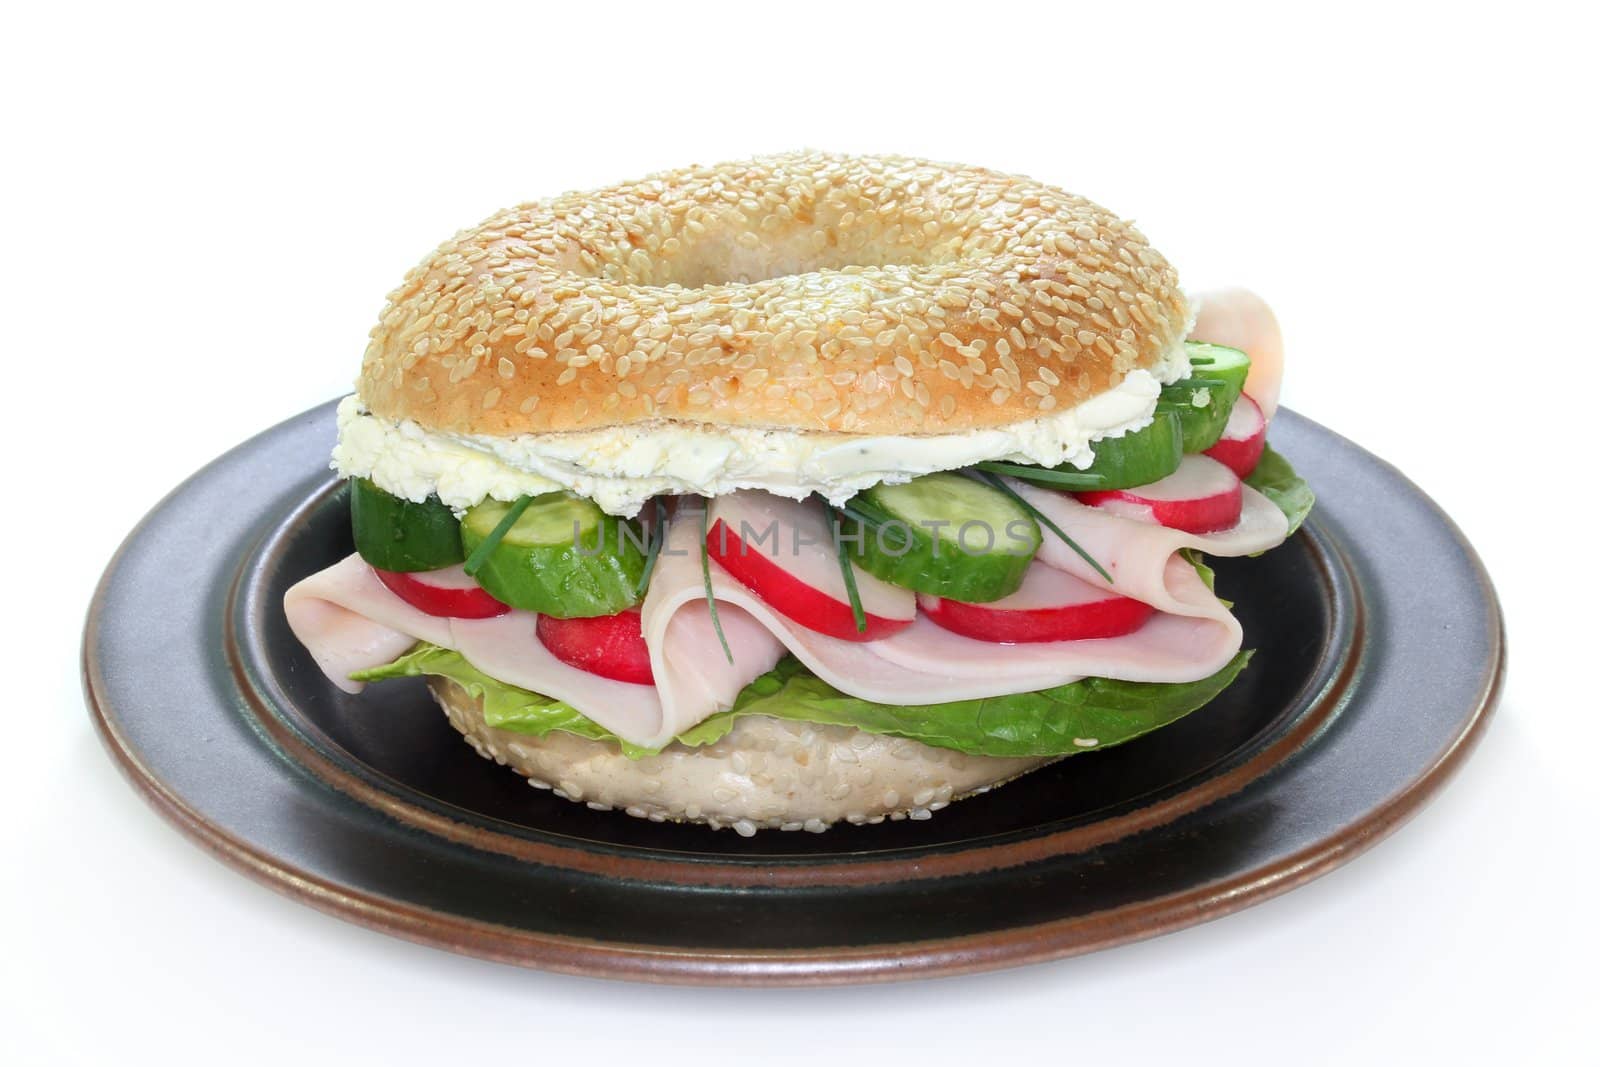 Bagel topped with a breast of turkey, radishes and cucumber